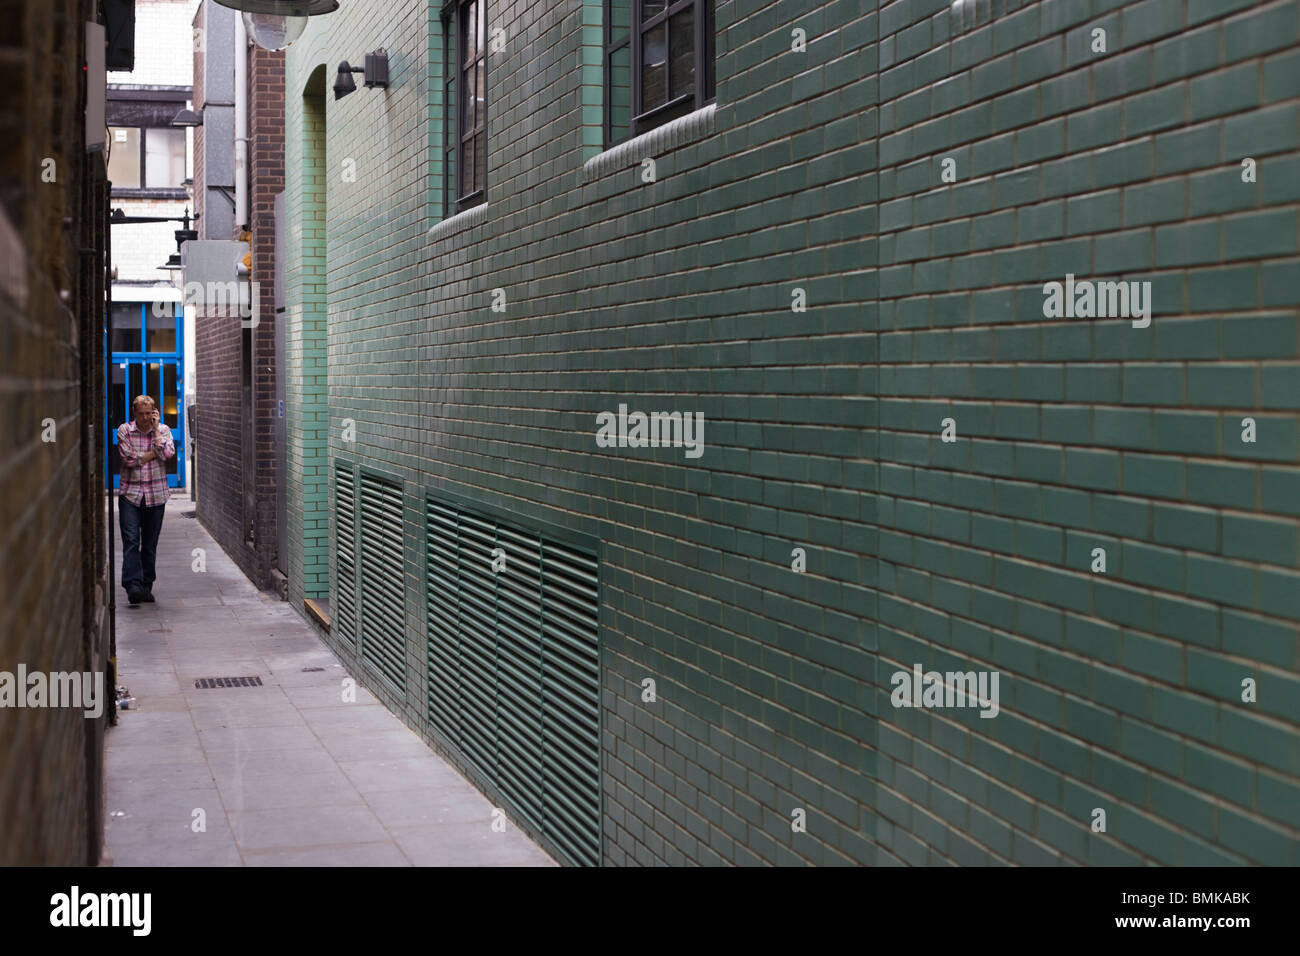 A man takes a discreet phone call in a narrow Soho alleyway outside offices in London. Stock Photo